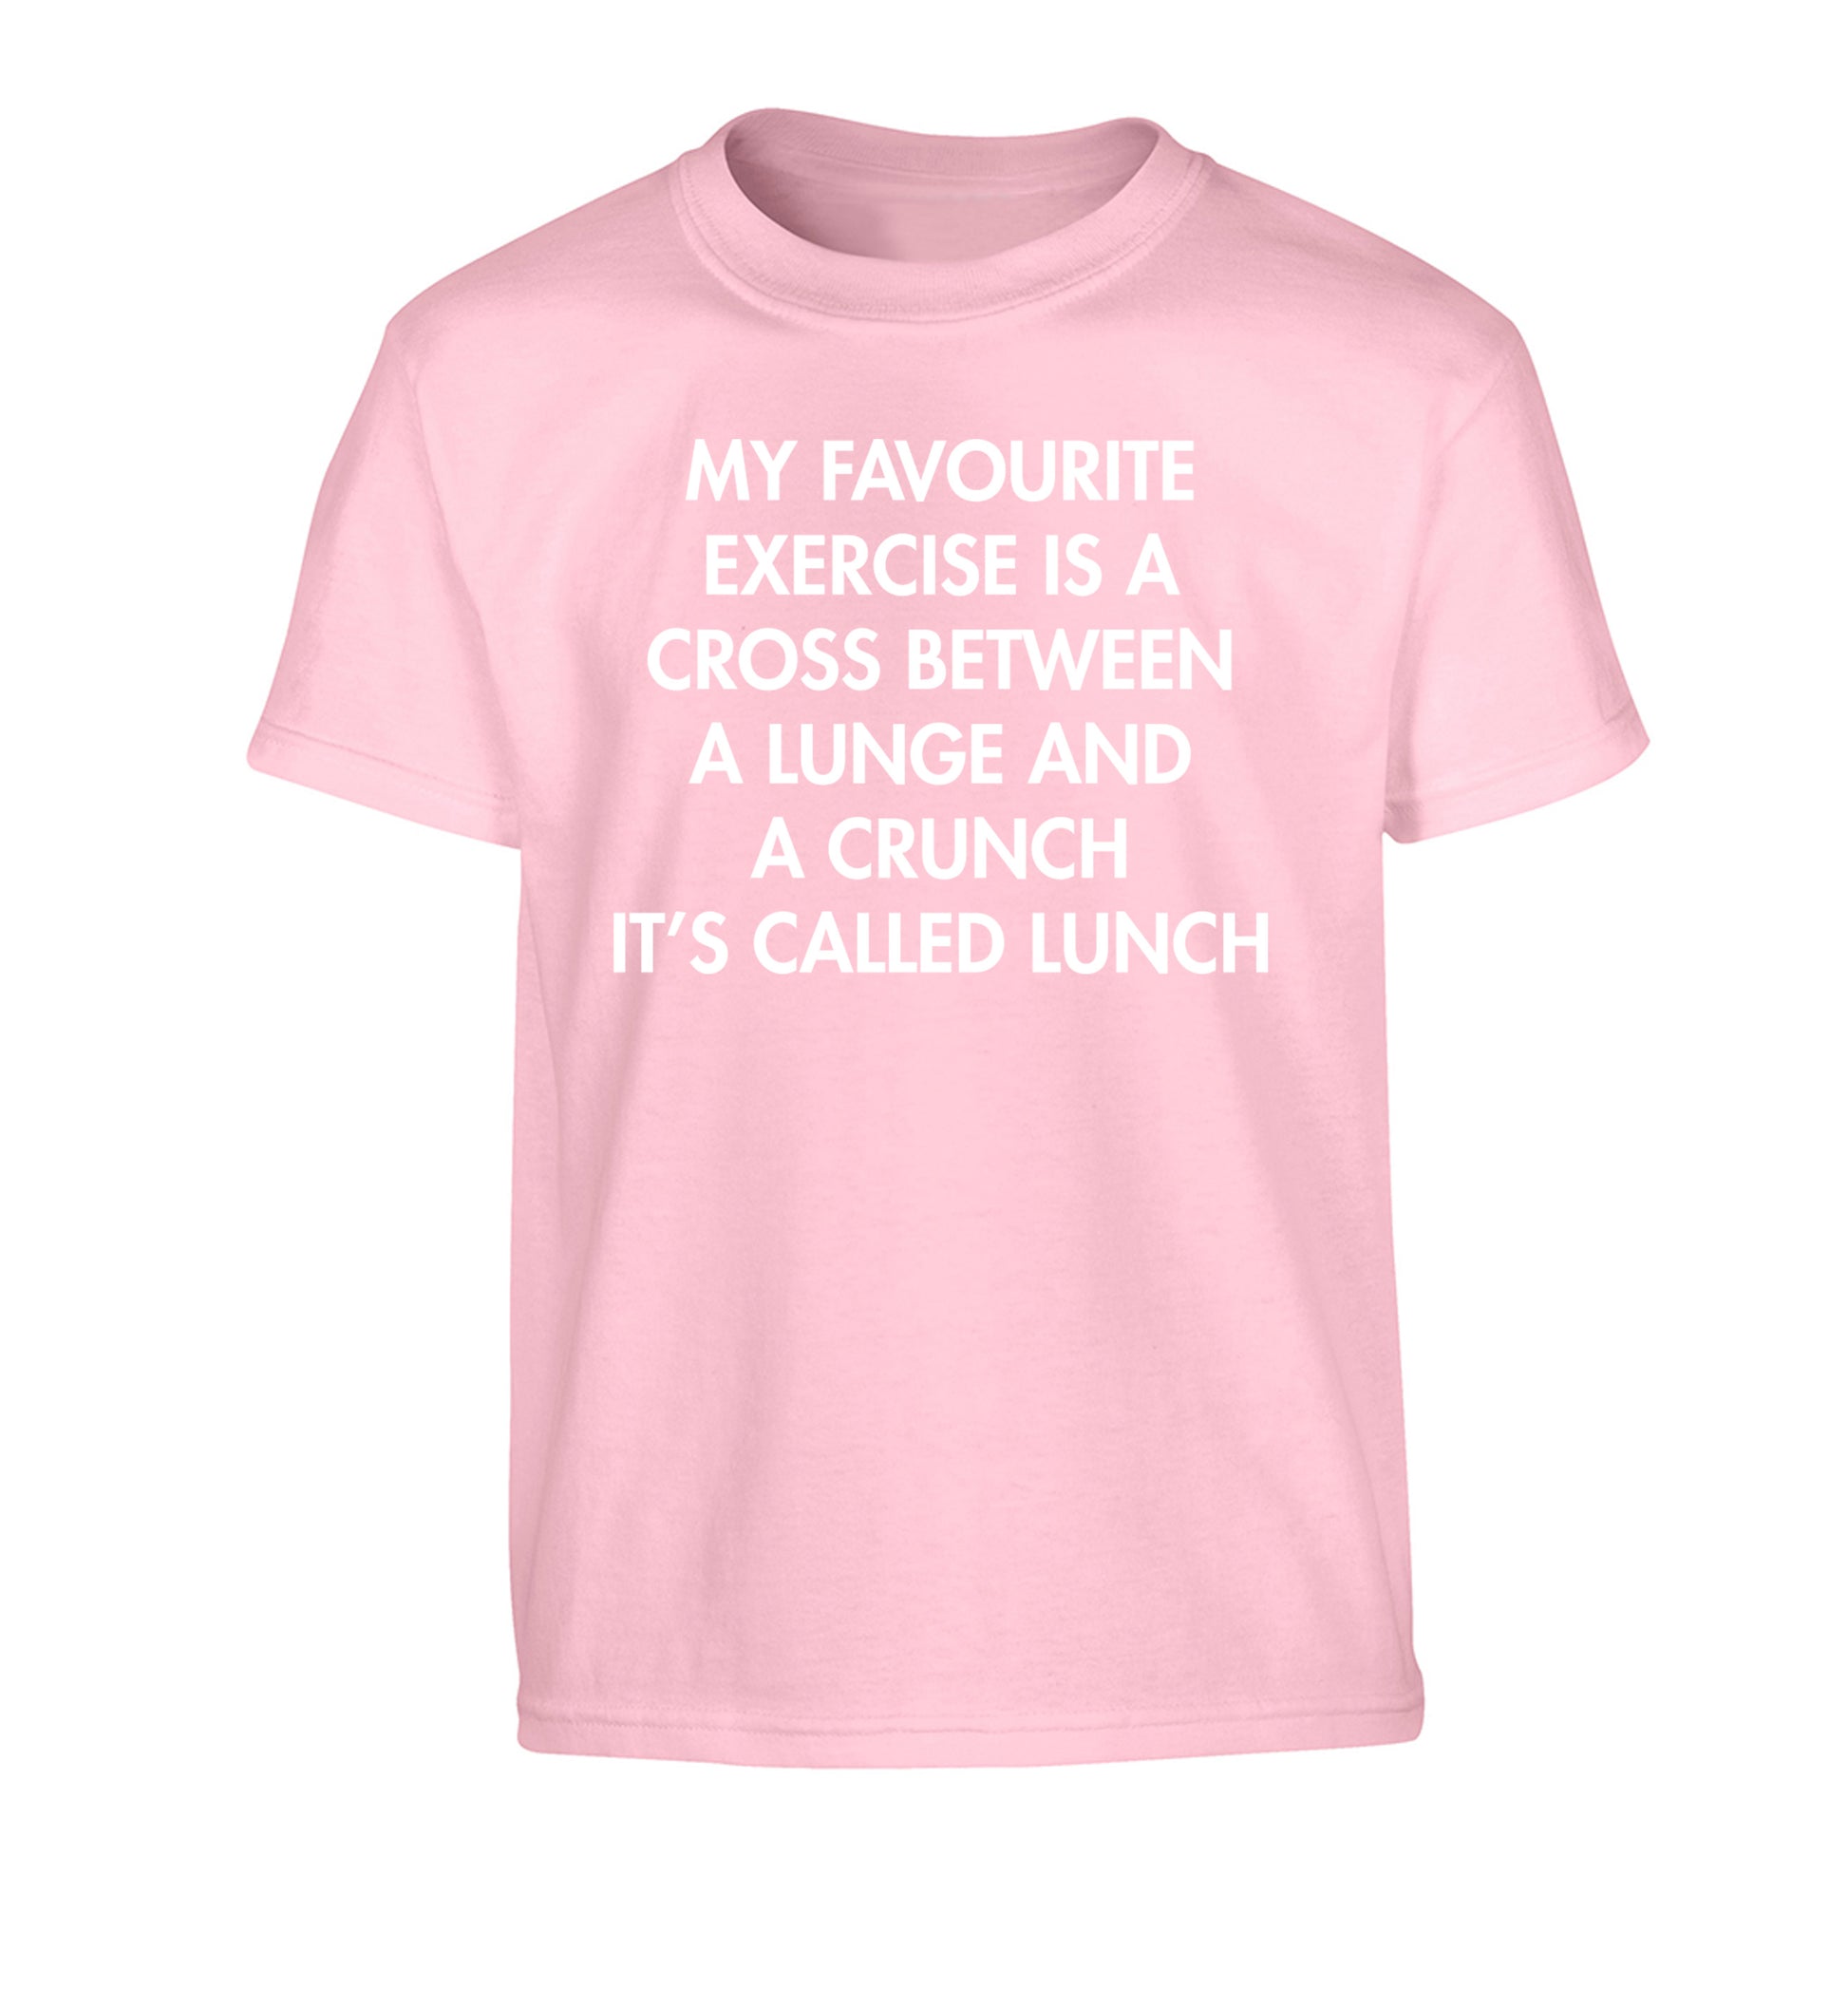 My favourite exercise is a cross between a lung and a crunch it's called lunch Children's light pink Tshirt 12-14 Years